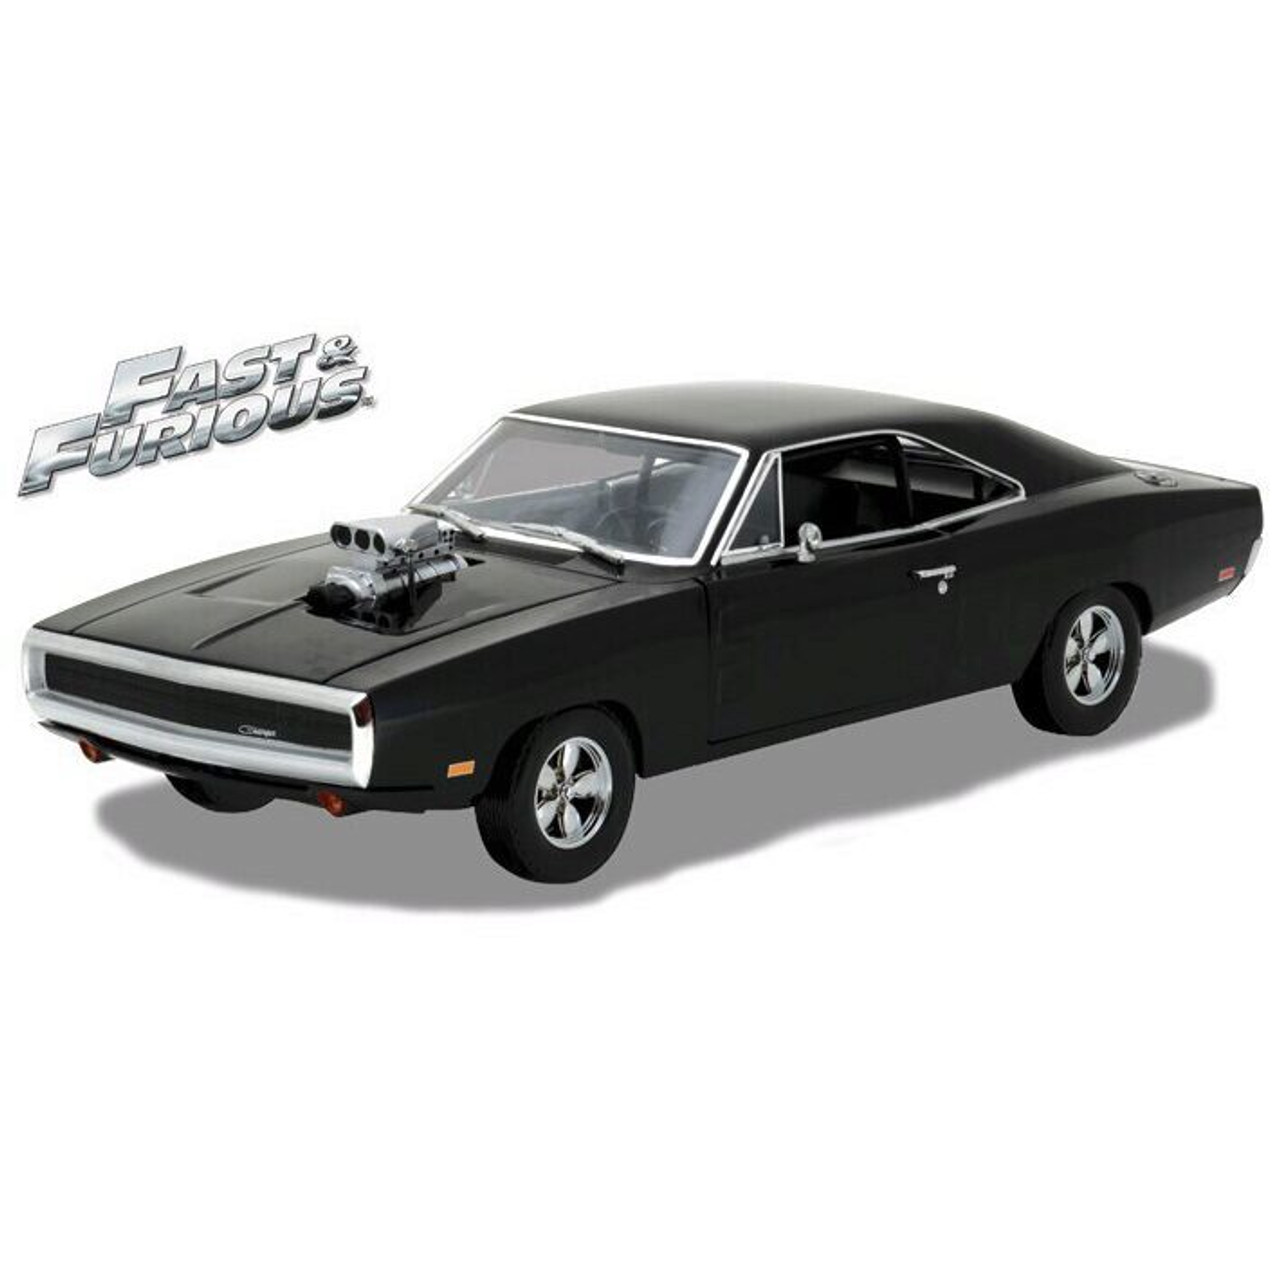 Artisan Collection Fast & Furious The Fast and the Furious (2001) 1/18  Dodge Charger 1970 - MyKombini